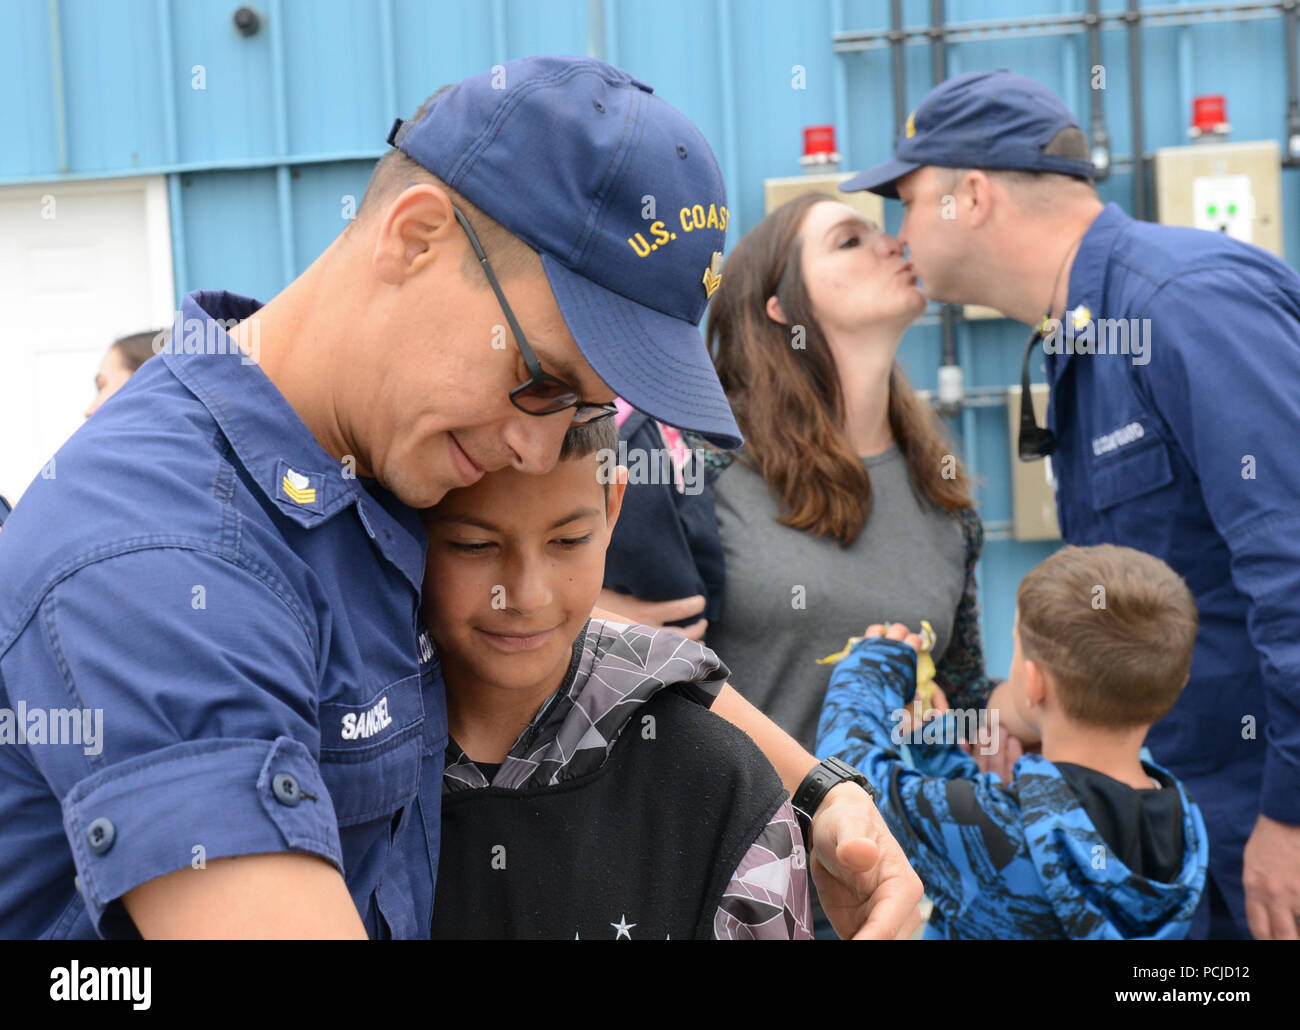 Petty Officer 1st Class Alberto Sanchez, a machinery technician aboard the Coast Guard Cutter Alex Haley (WMEC 39), hugs his son after the cutter moored at its homeport in Kodiak, Alaska, August 1, 2018. The crew members aboard the Alex Haley returned home from a 90-day deployment patrolling more than 16,000 miles throughout the Pacific Ocean. U.S. Coast Guard photo by Petty Officer 3rd Class Lauren Dean. Stock Photo